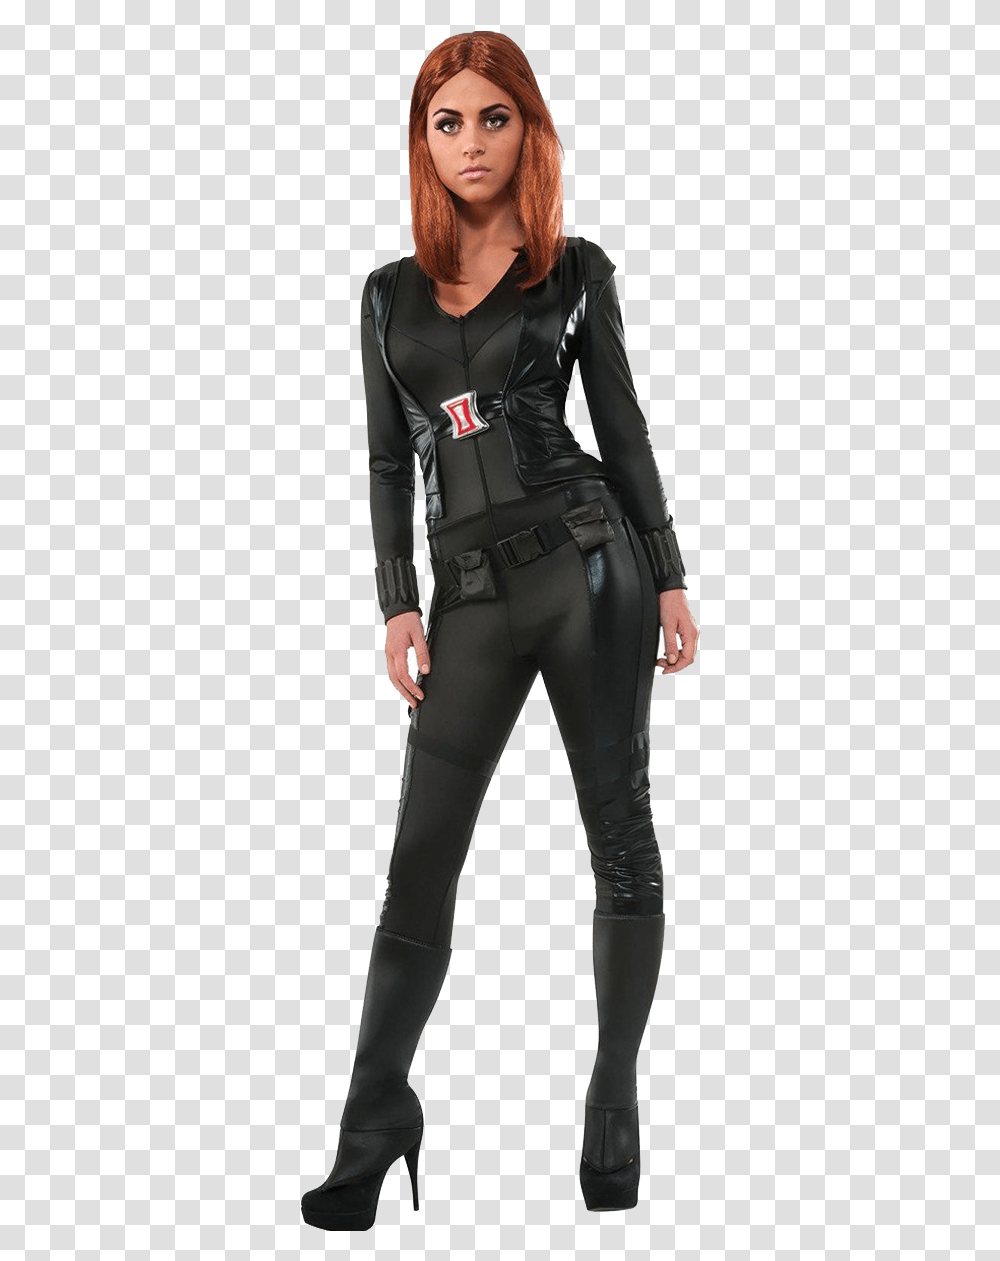 Black Widow Image Background, Pants, Clothing, Apparel, Person Transparent Png